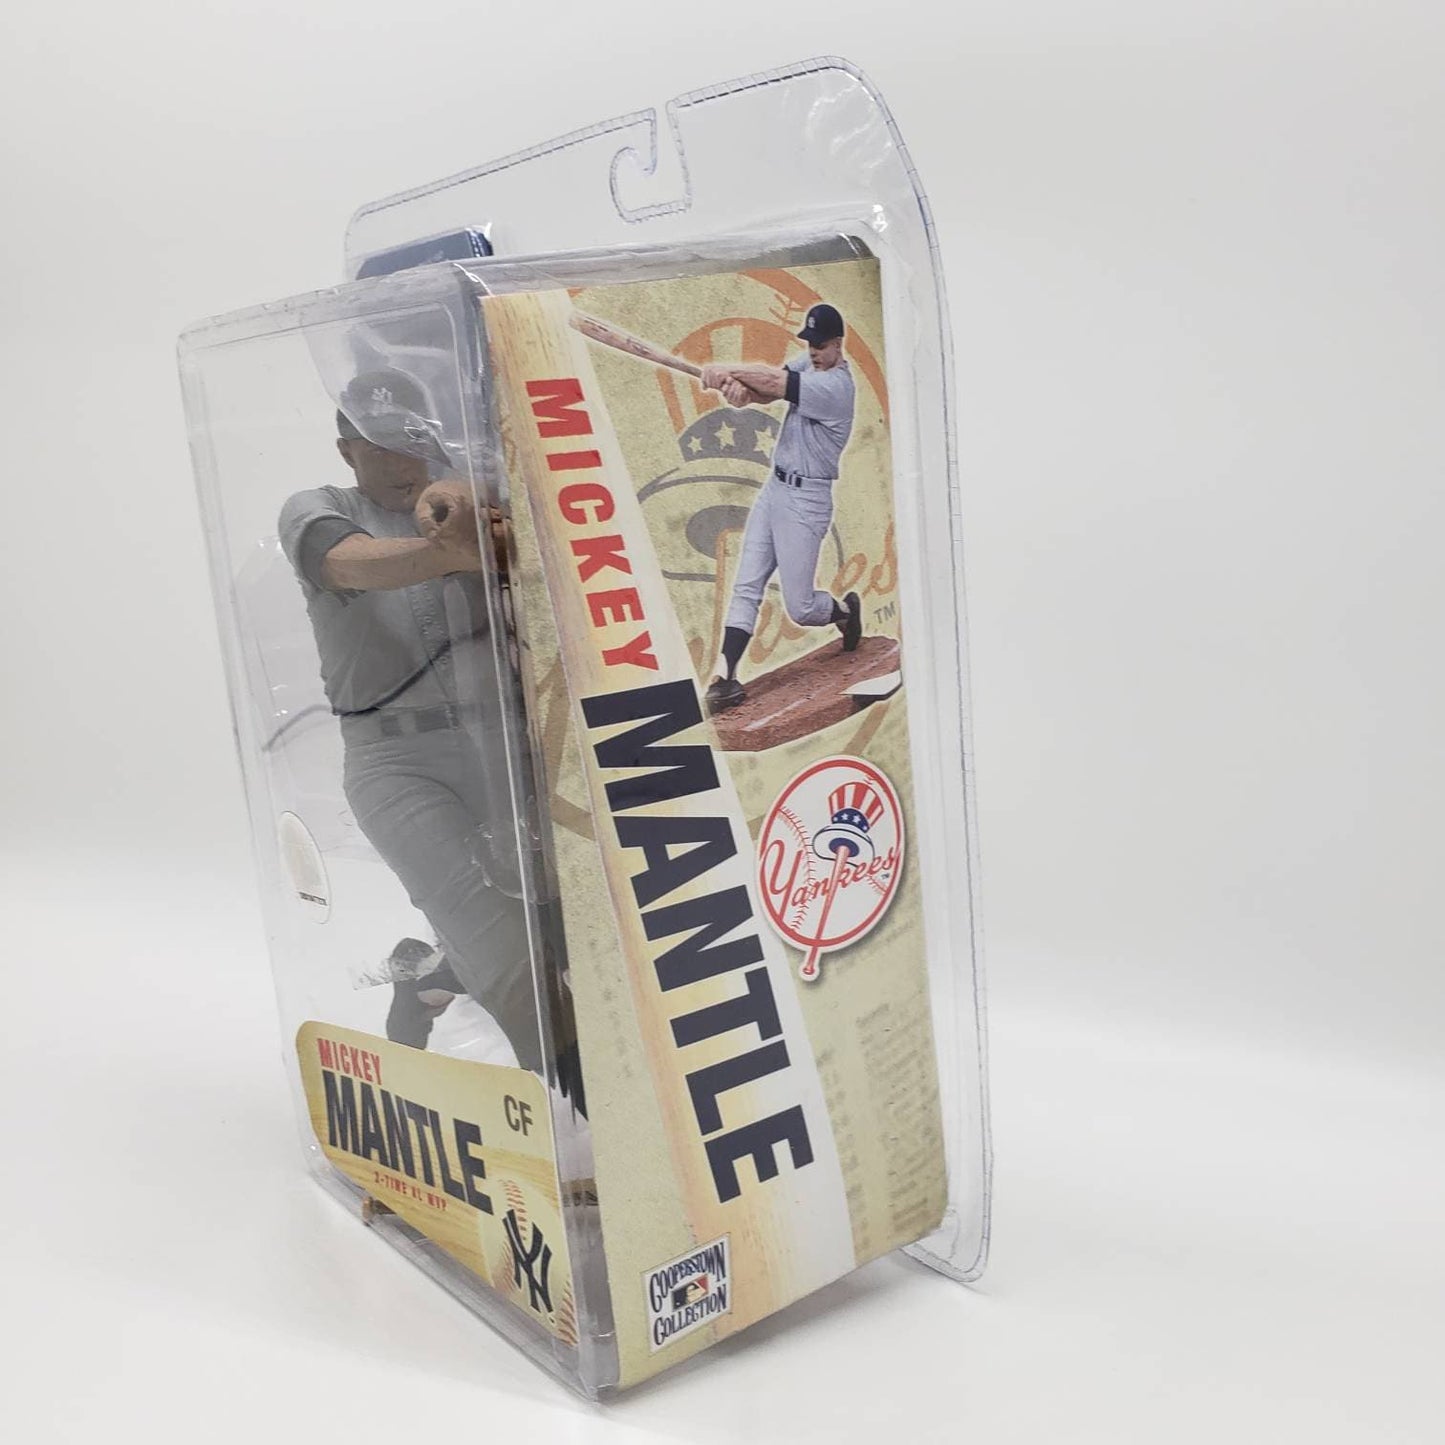 McFarlane Mickey Mantle New York Yankees Gray Cooperstown Series 3 Collectable Baseball Action Figure NY Yankees Decor MLB Memorabilia